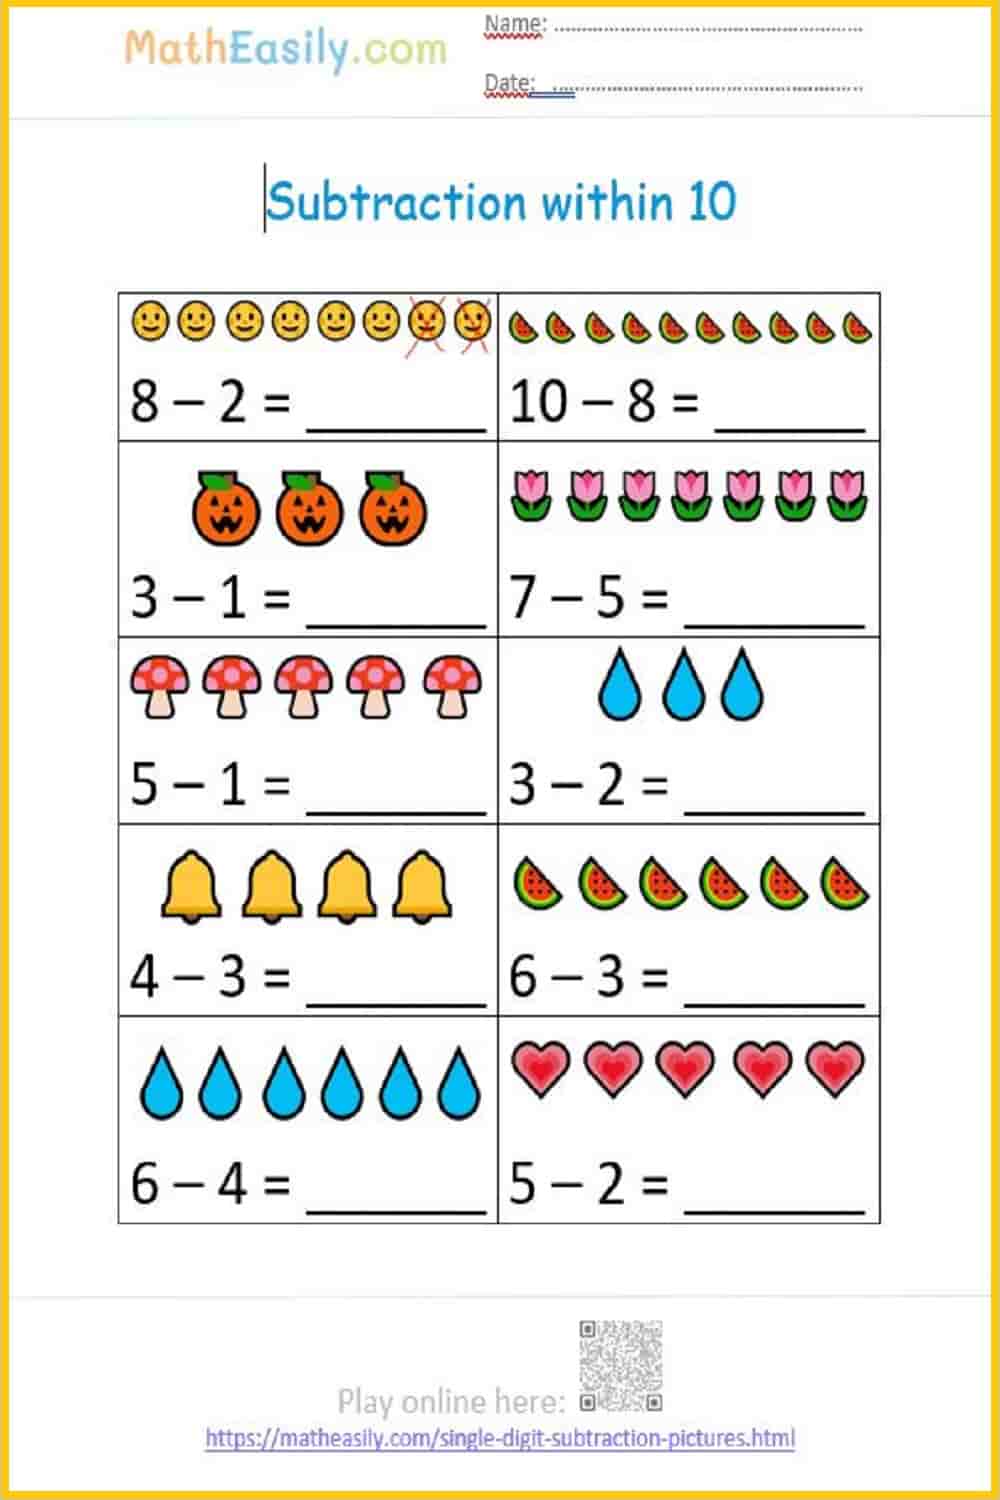 Single digit subtraction within 10: worksheets and games